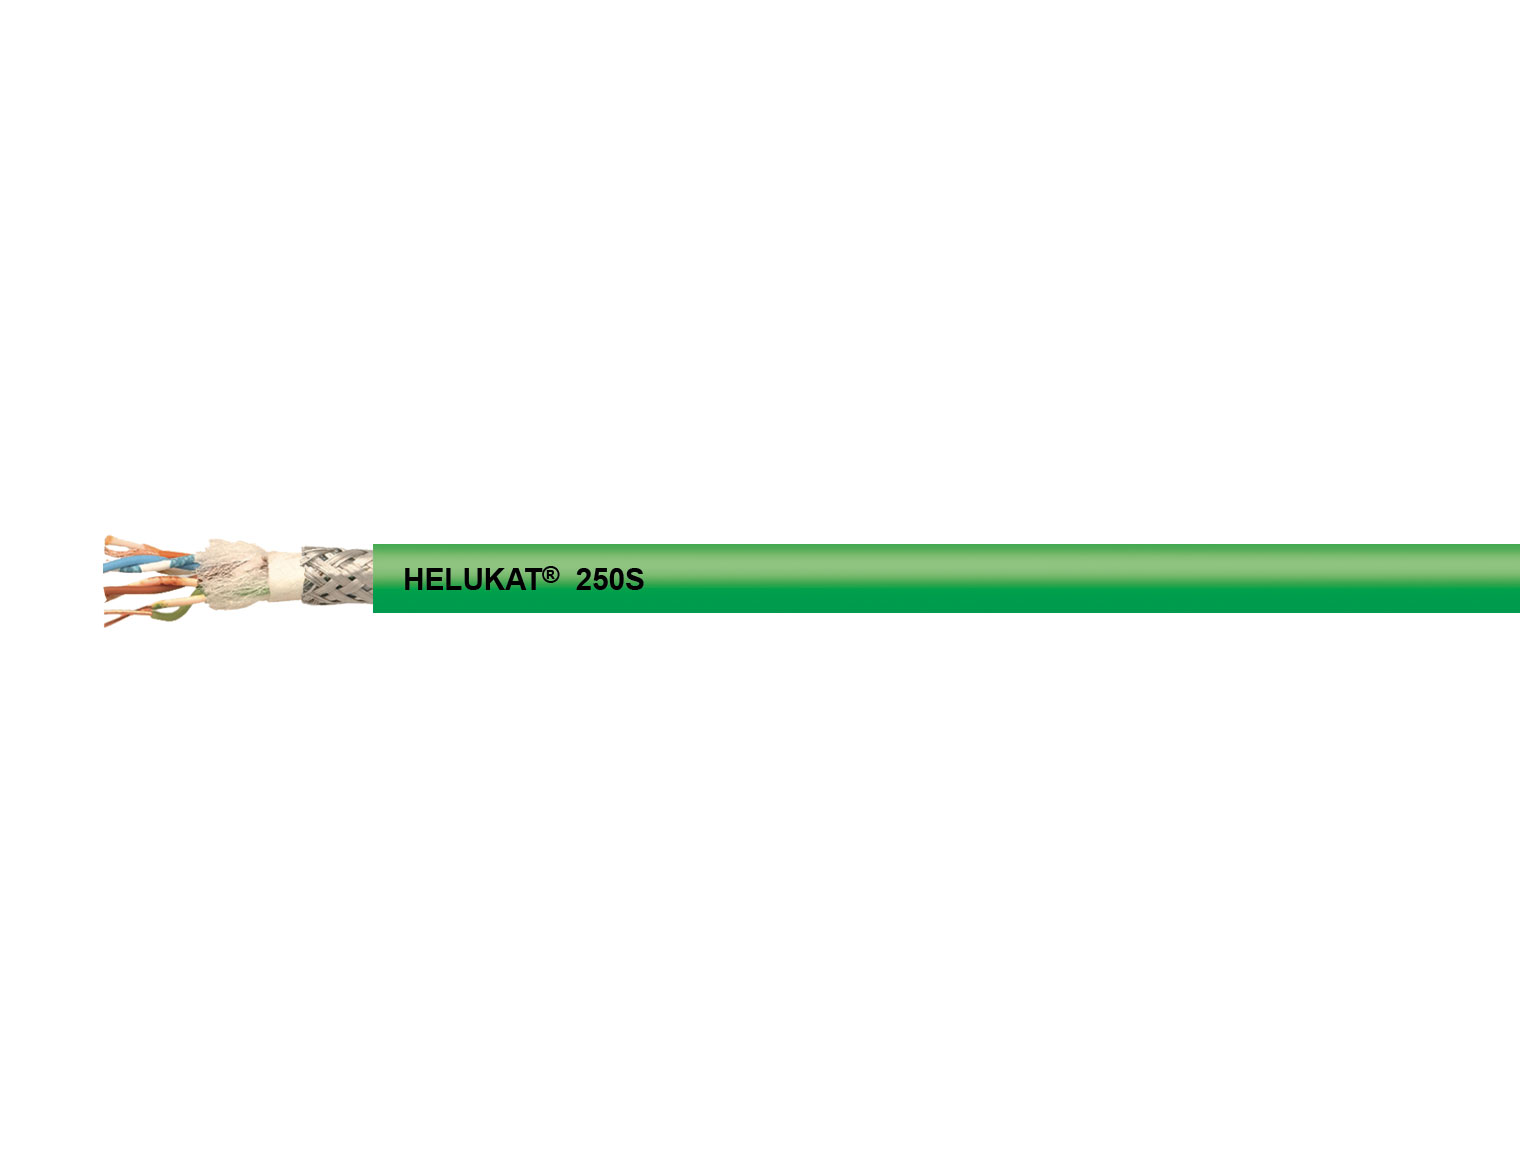 Industrial Ethernet cable, Cat. 6, up to 250 MHz, PVC Outer sheath, suitable for use in drag chains